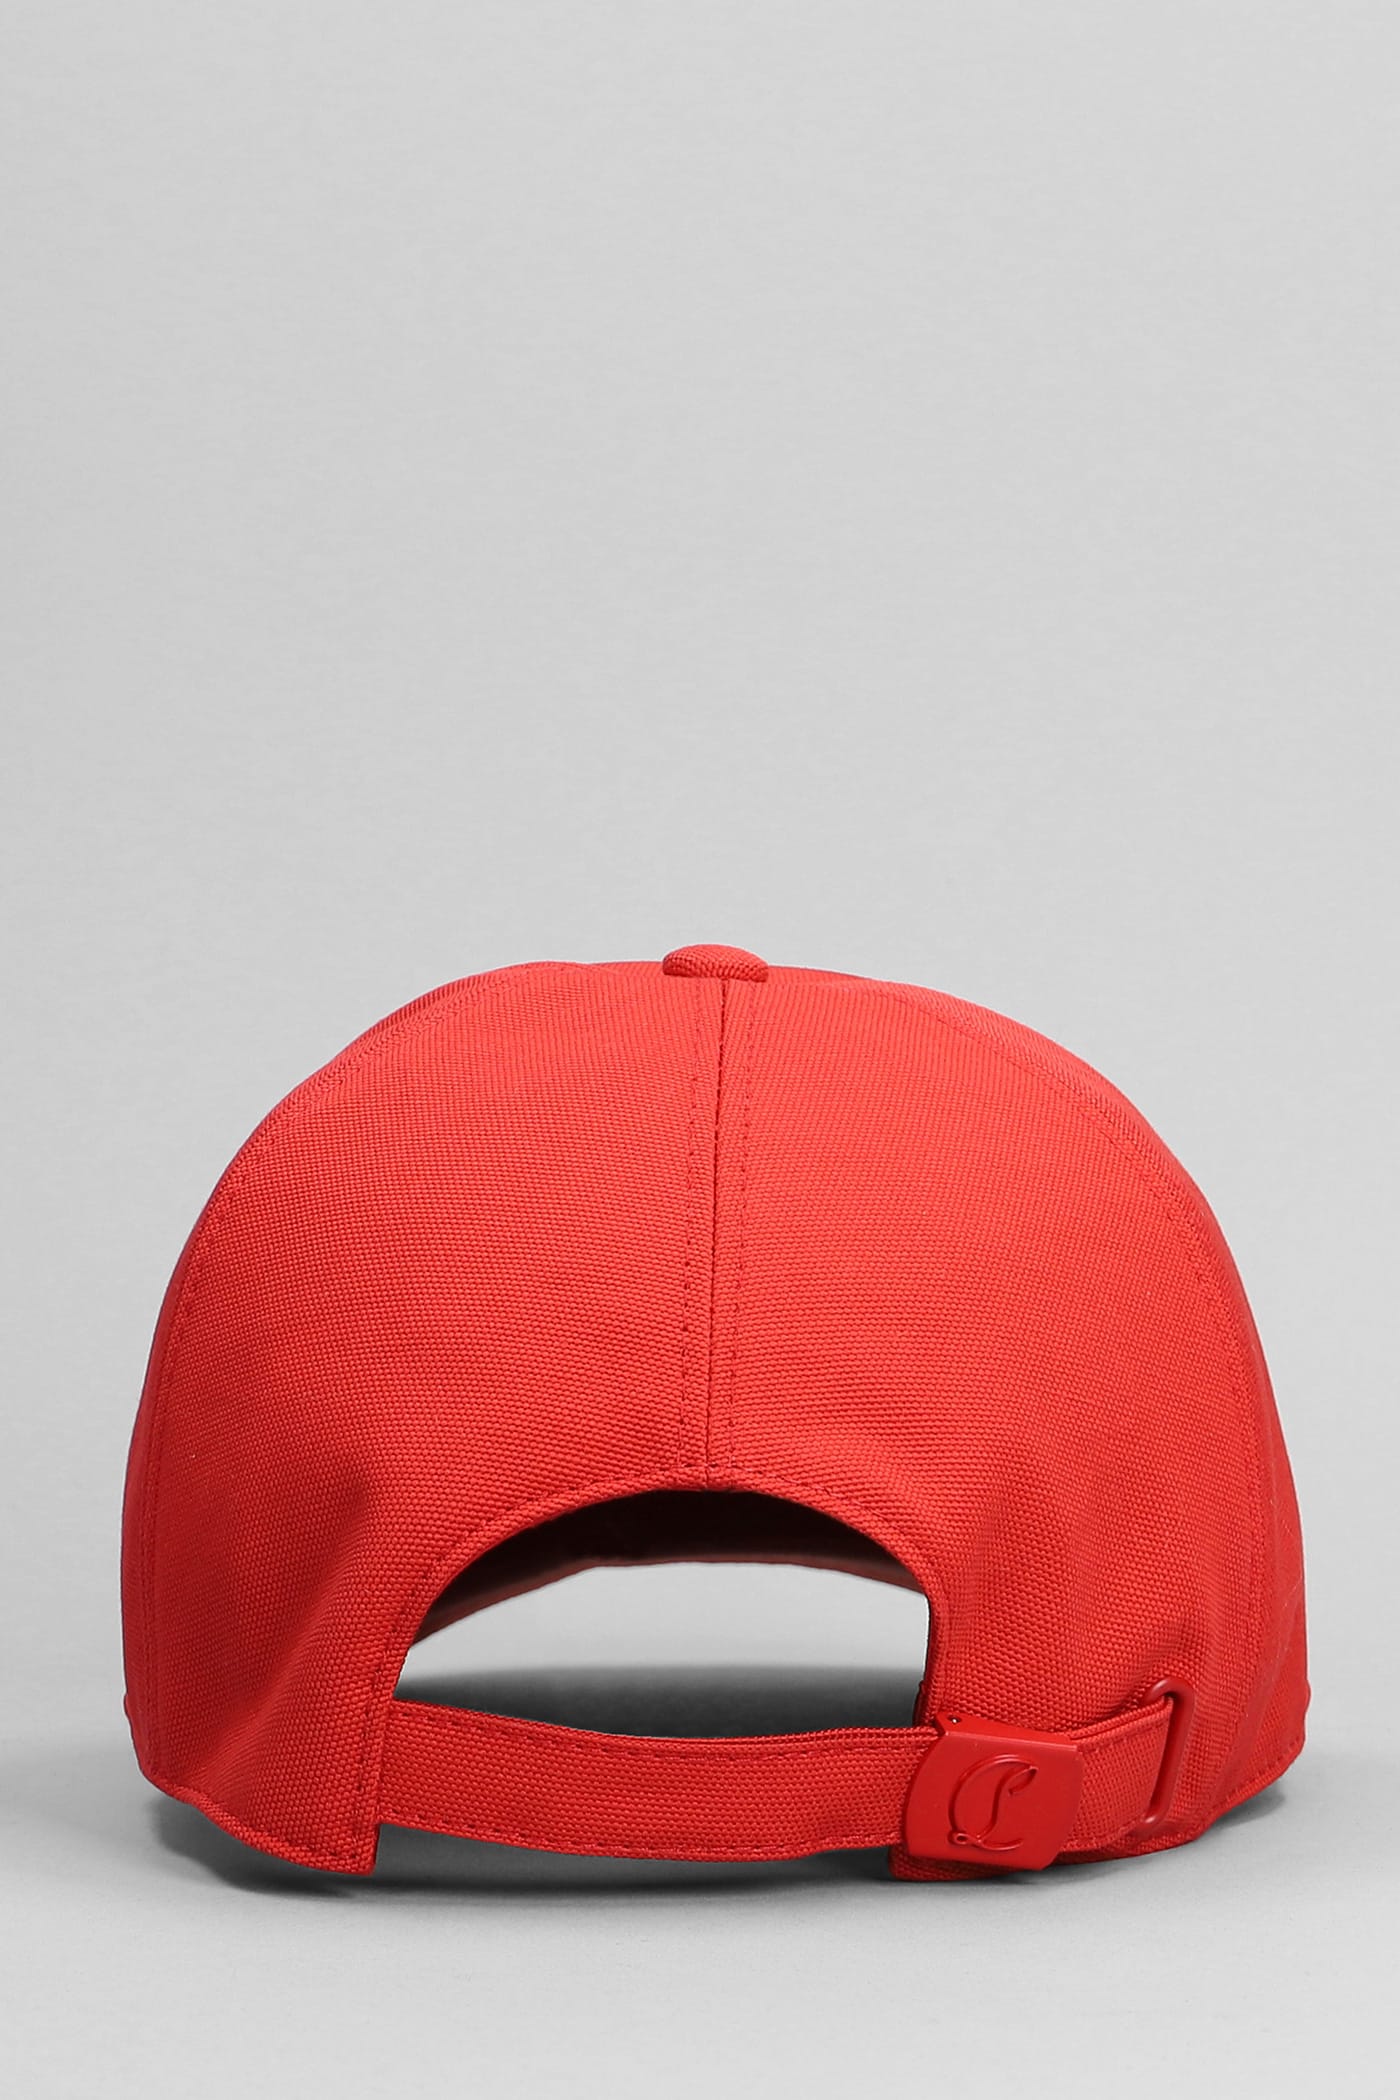 Shop Christian Louboutin Hats In Red Cotton